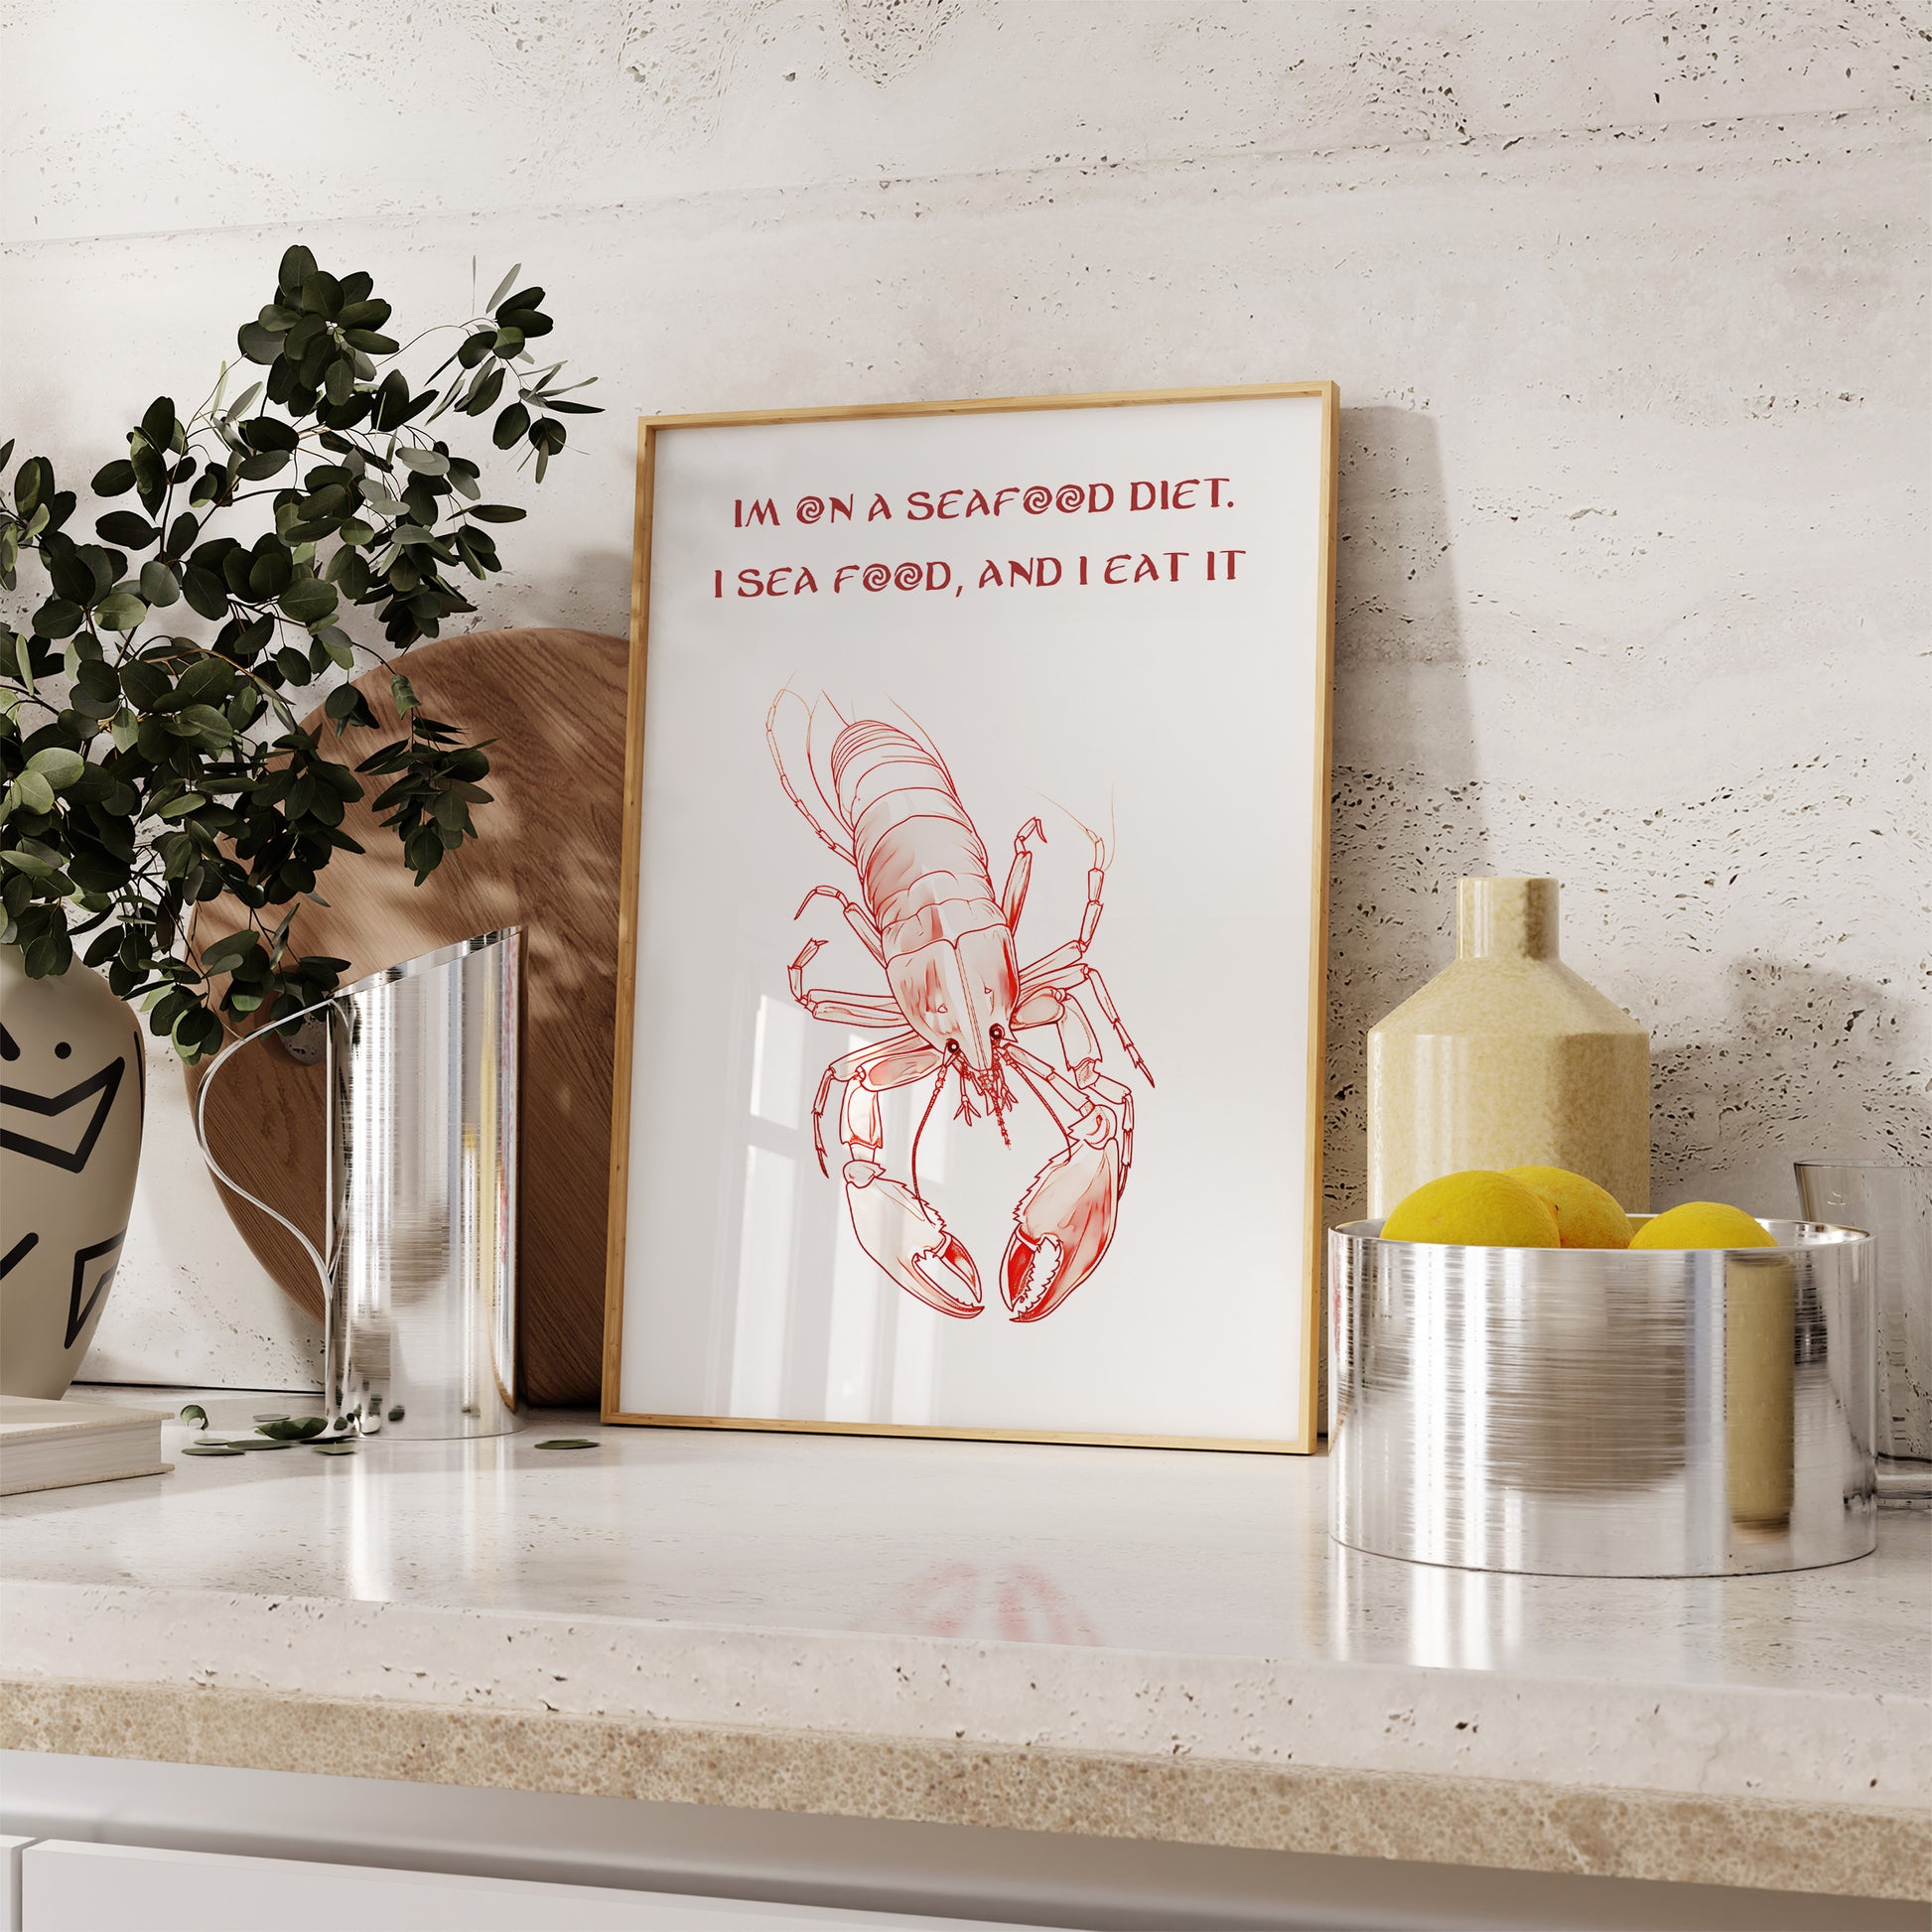 A framed image with a lobster illustration and a pun "I'm on a seafood diet. I sea food, and I eat it" on a kitchen counter.